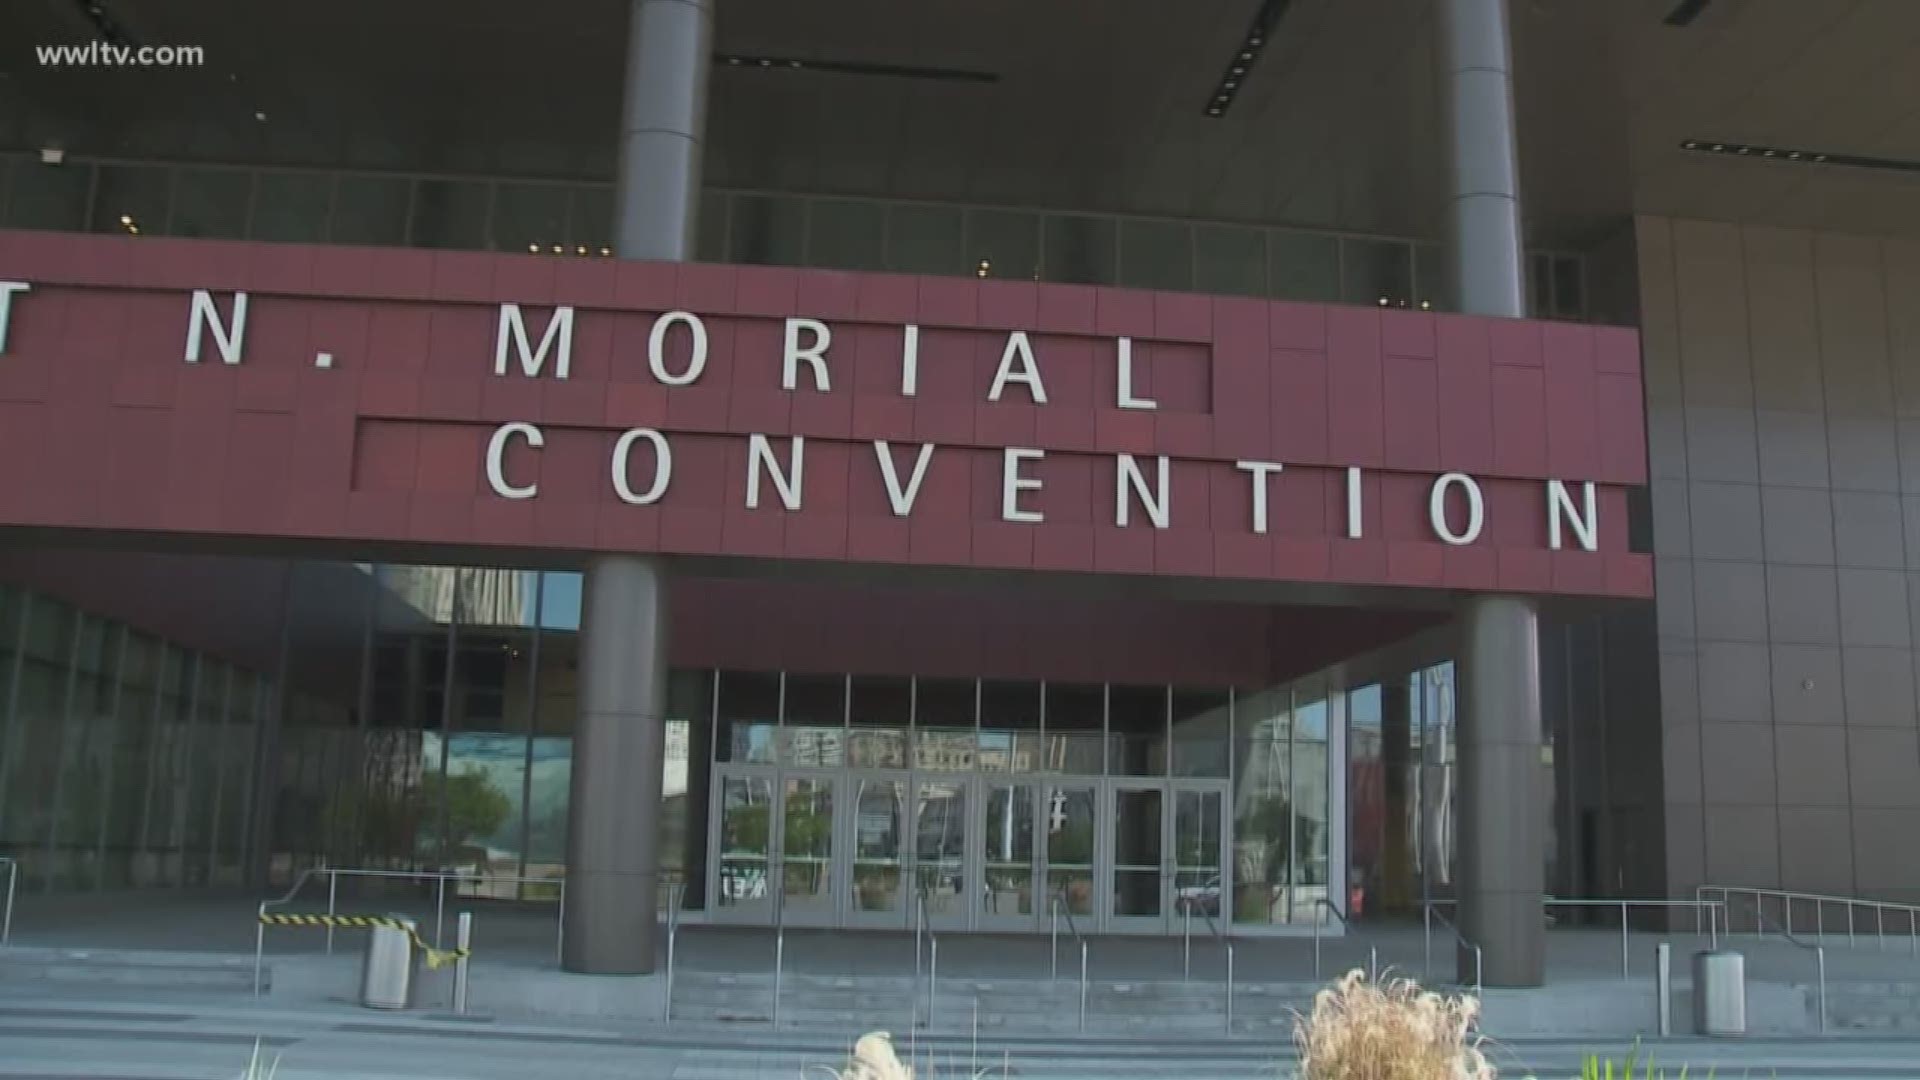 The last time the convention hall was used in an emergency was during Hurricane Katrina in 2005.